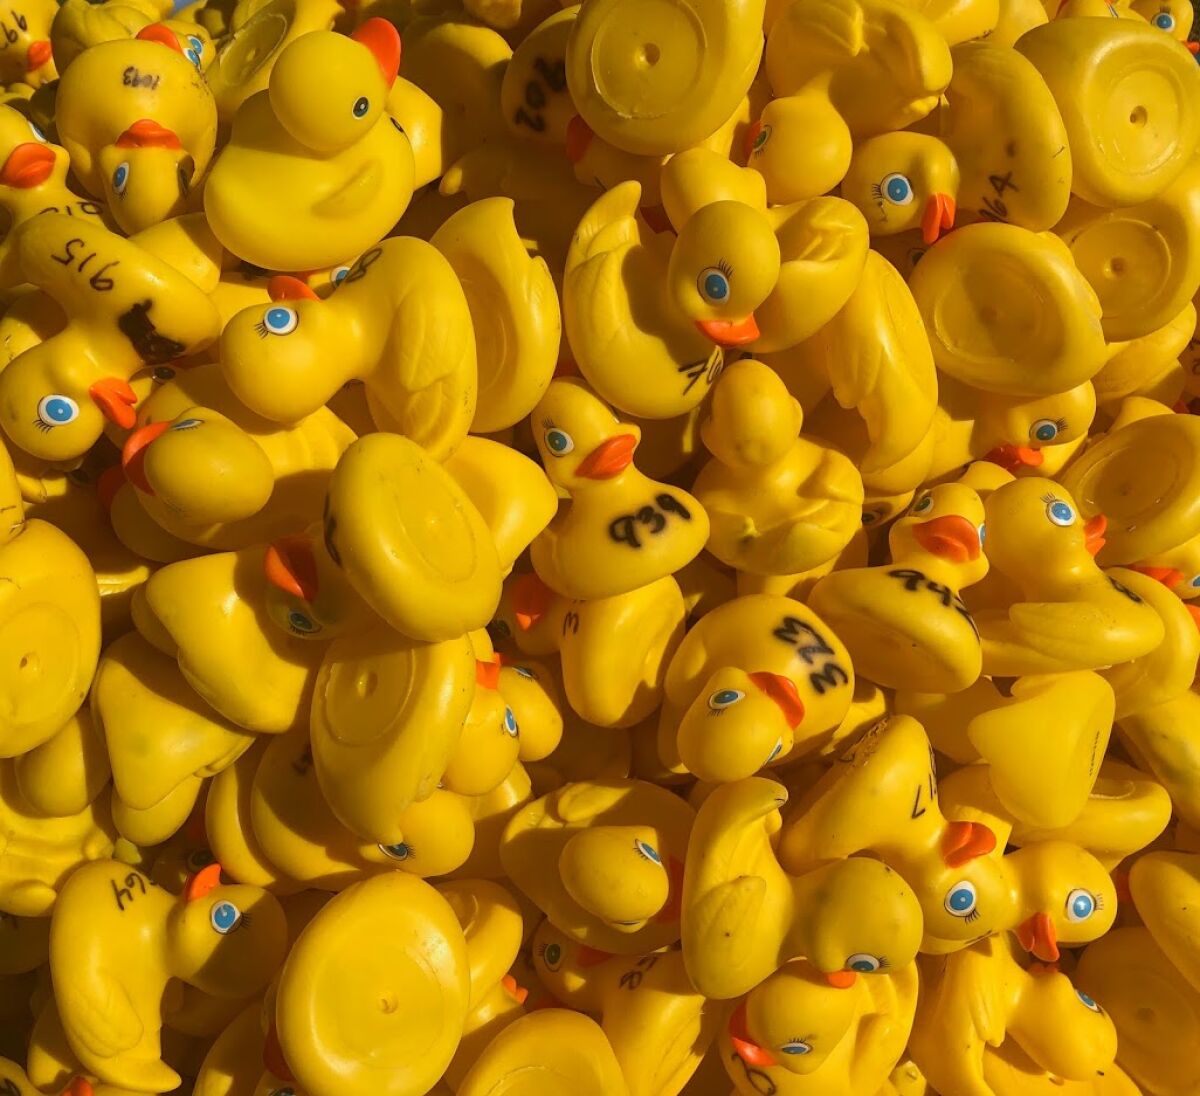 Ducks ready to go for the June 7 event.